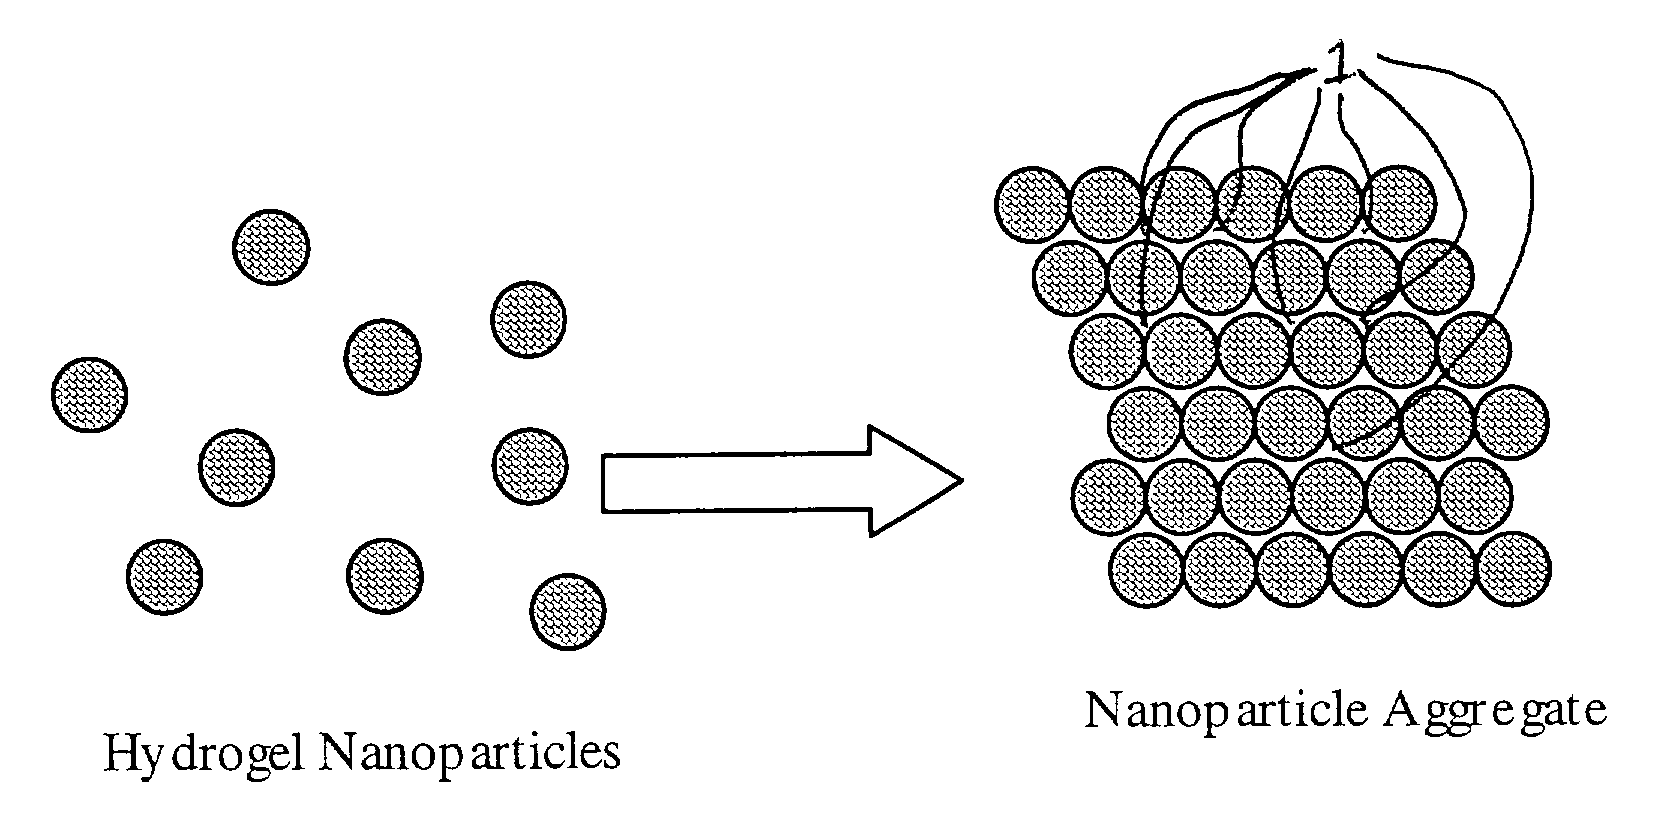 Shape-retentive hydrogel particle aggregates and their uses